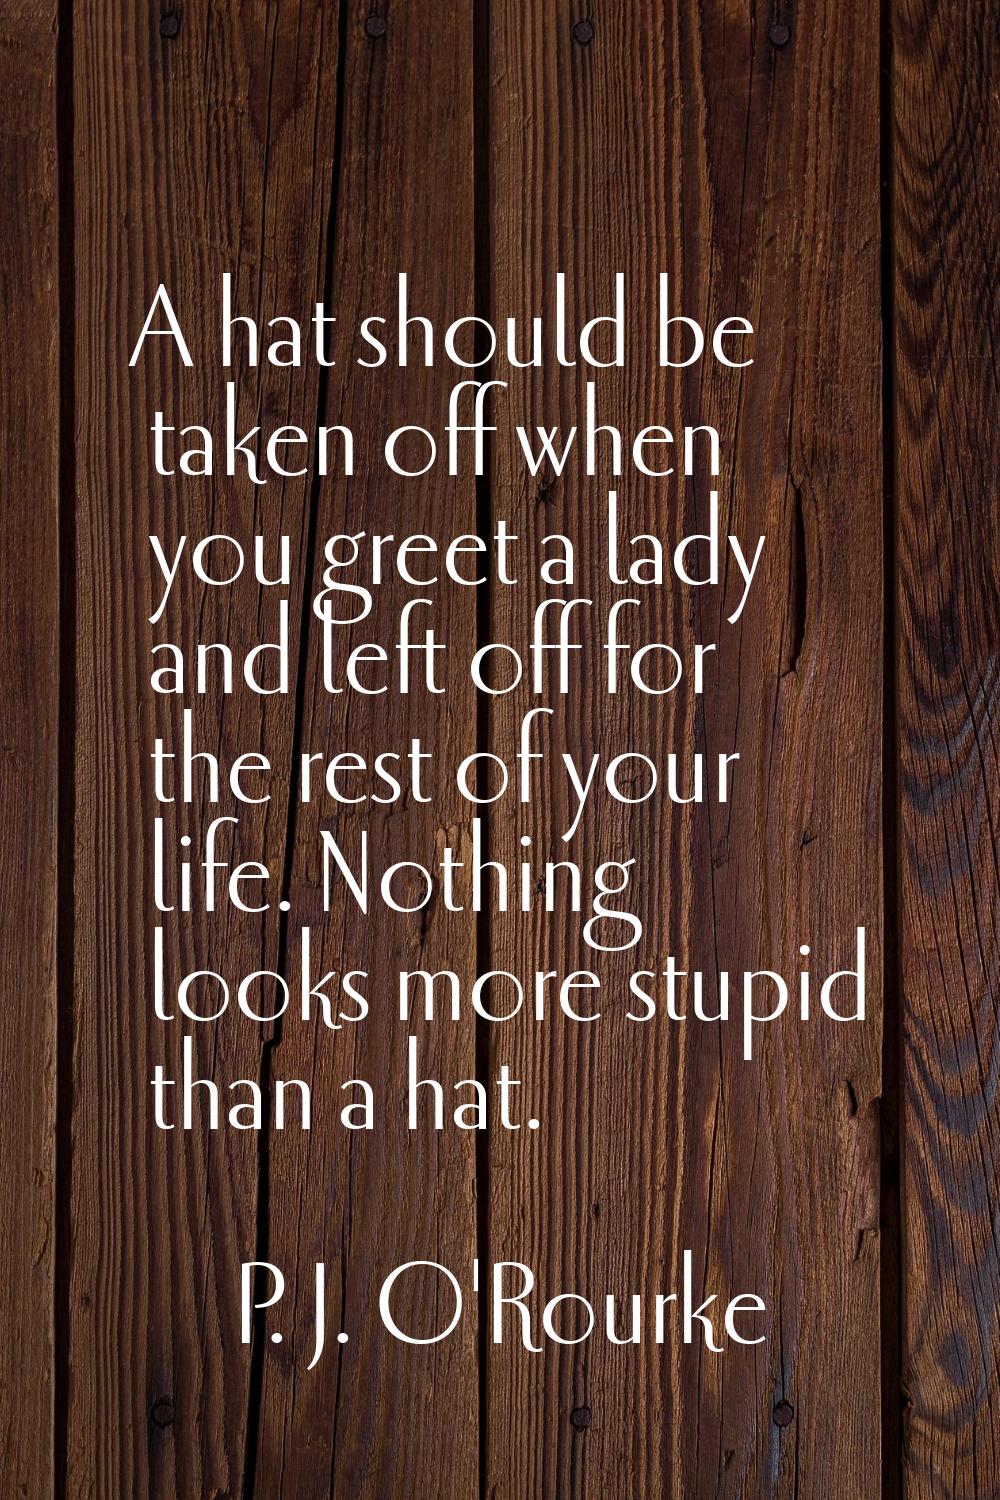 A hat should be taken off when you greet a lady and left off for the rest of your life. Nothing loo